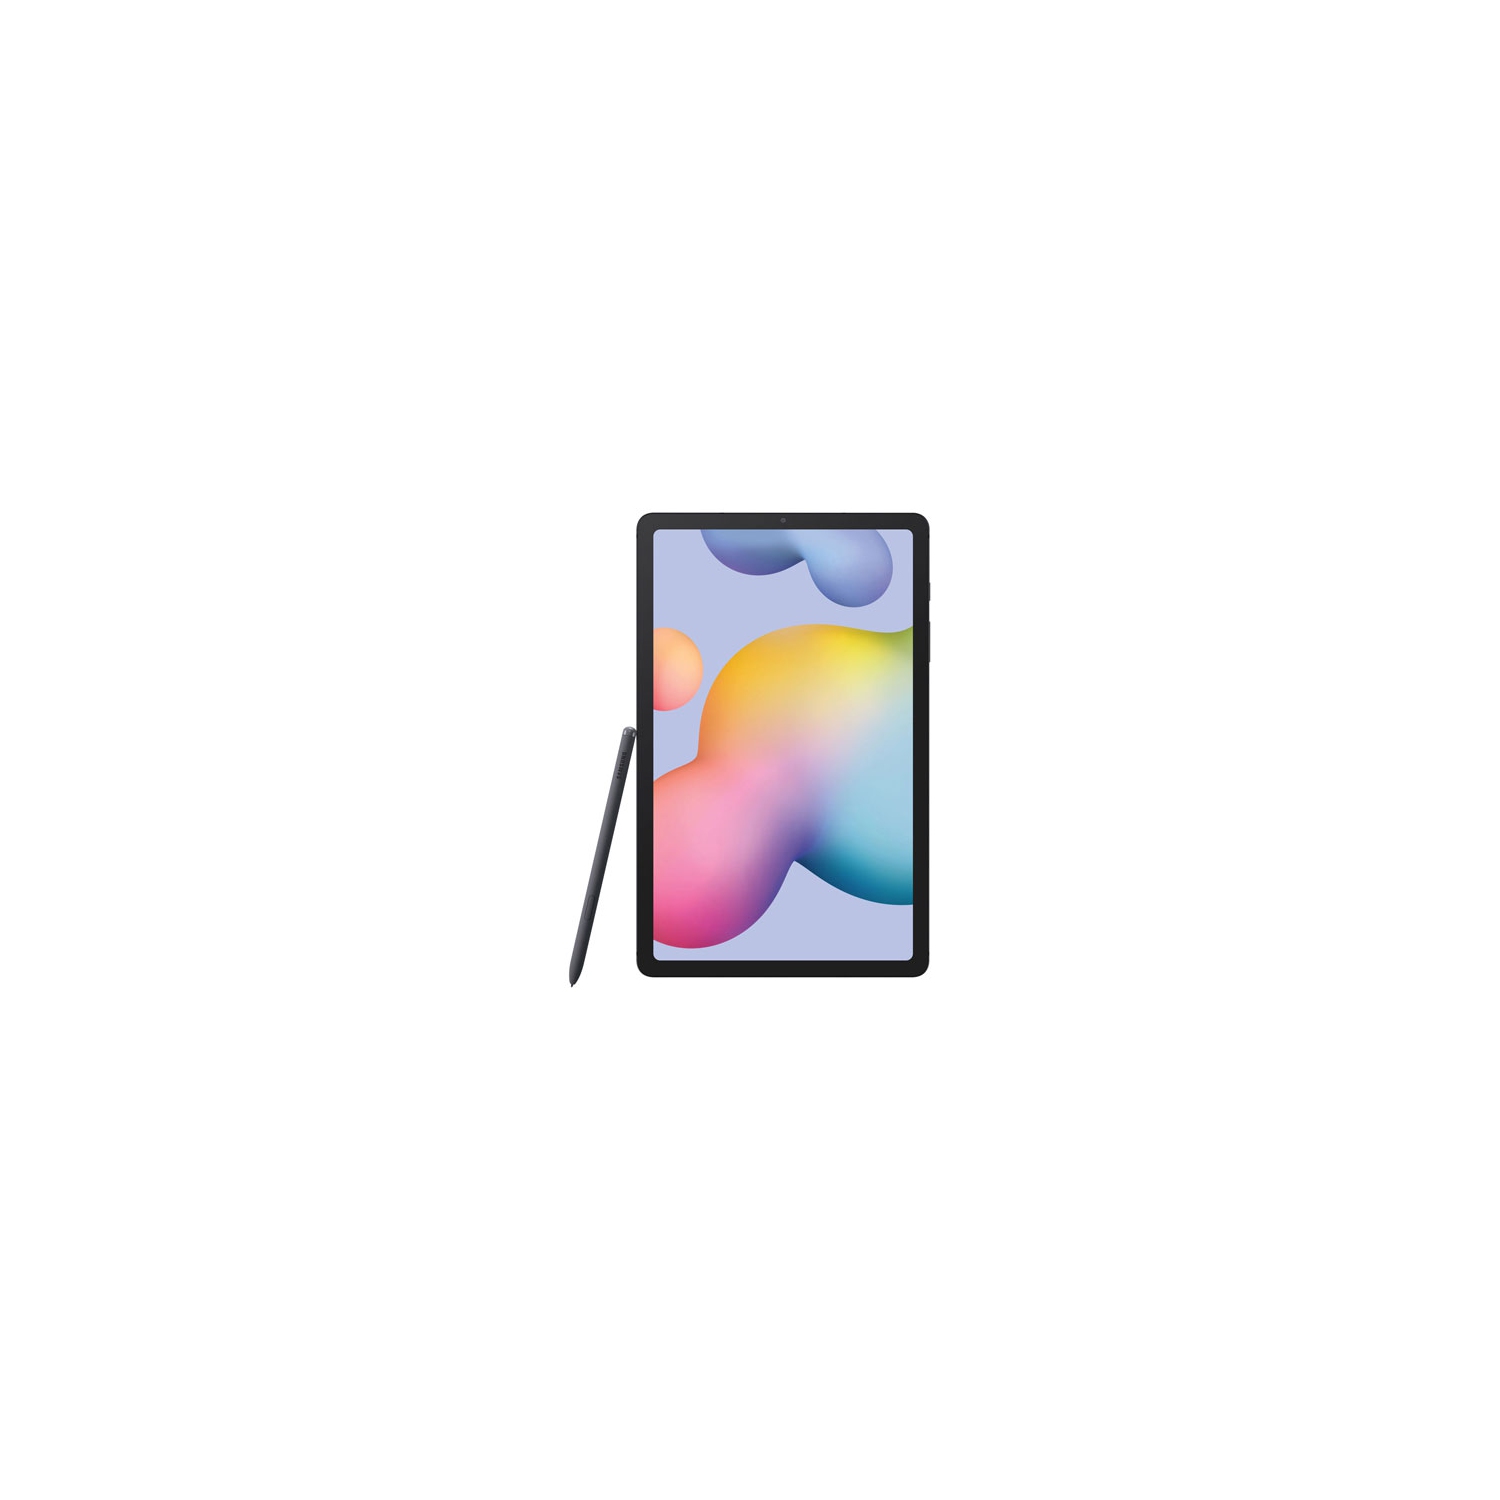 Open Box - Samsung Galaxy Tab S6 Lite 10.4" 64GB Android 12 Tablet with Snapdragon 720G 8-Core Processor - Grey